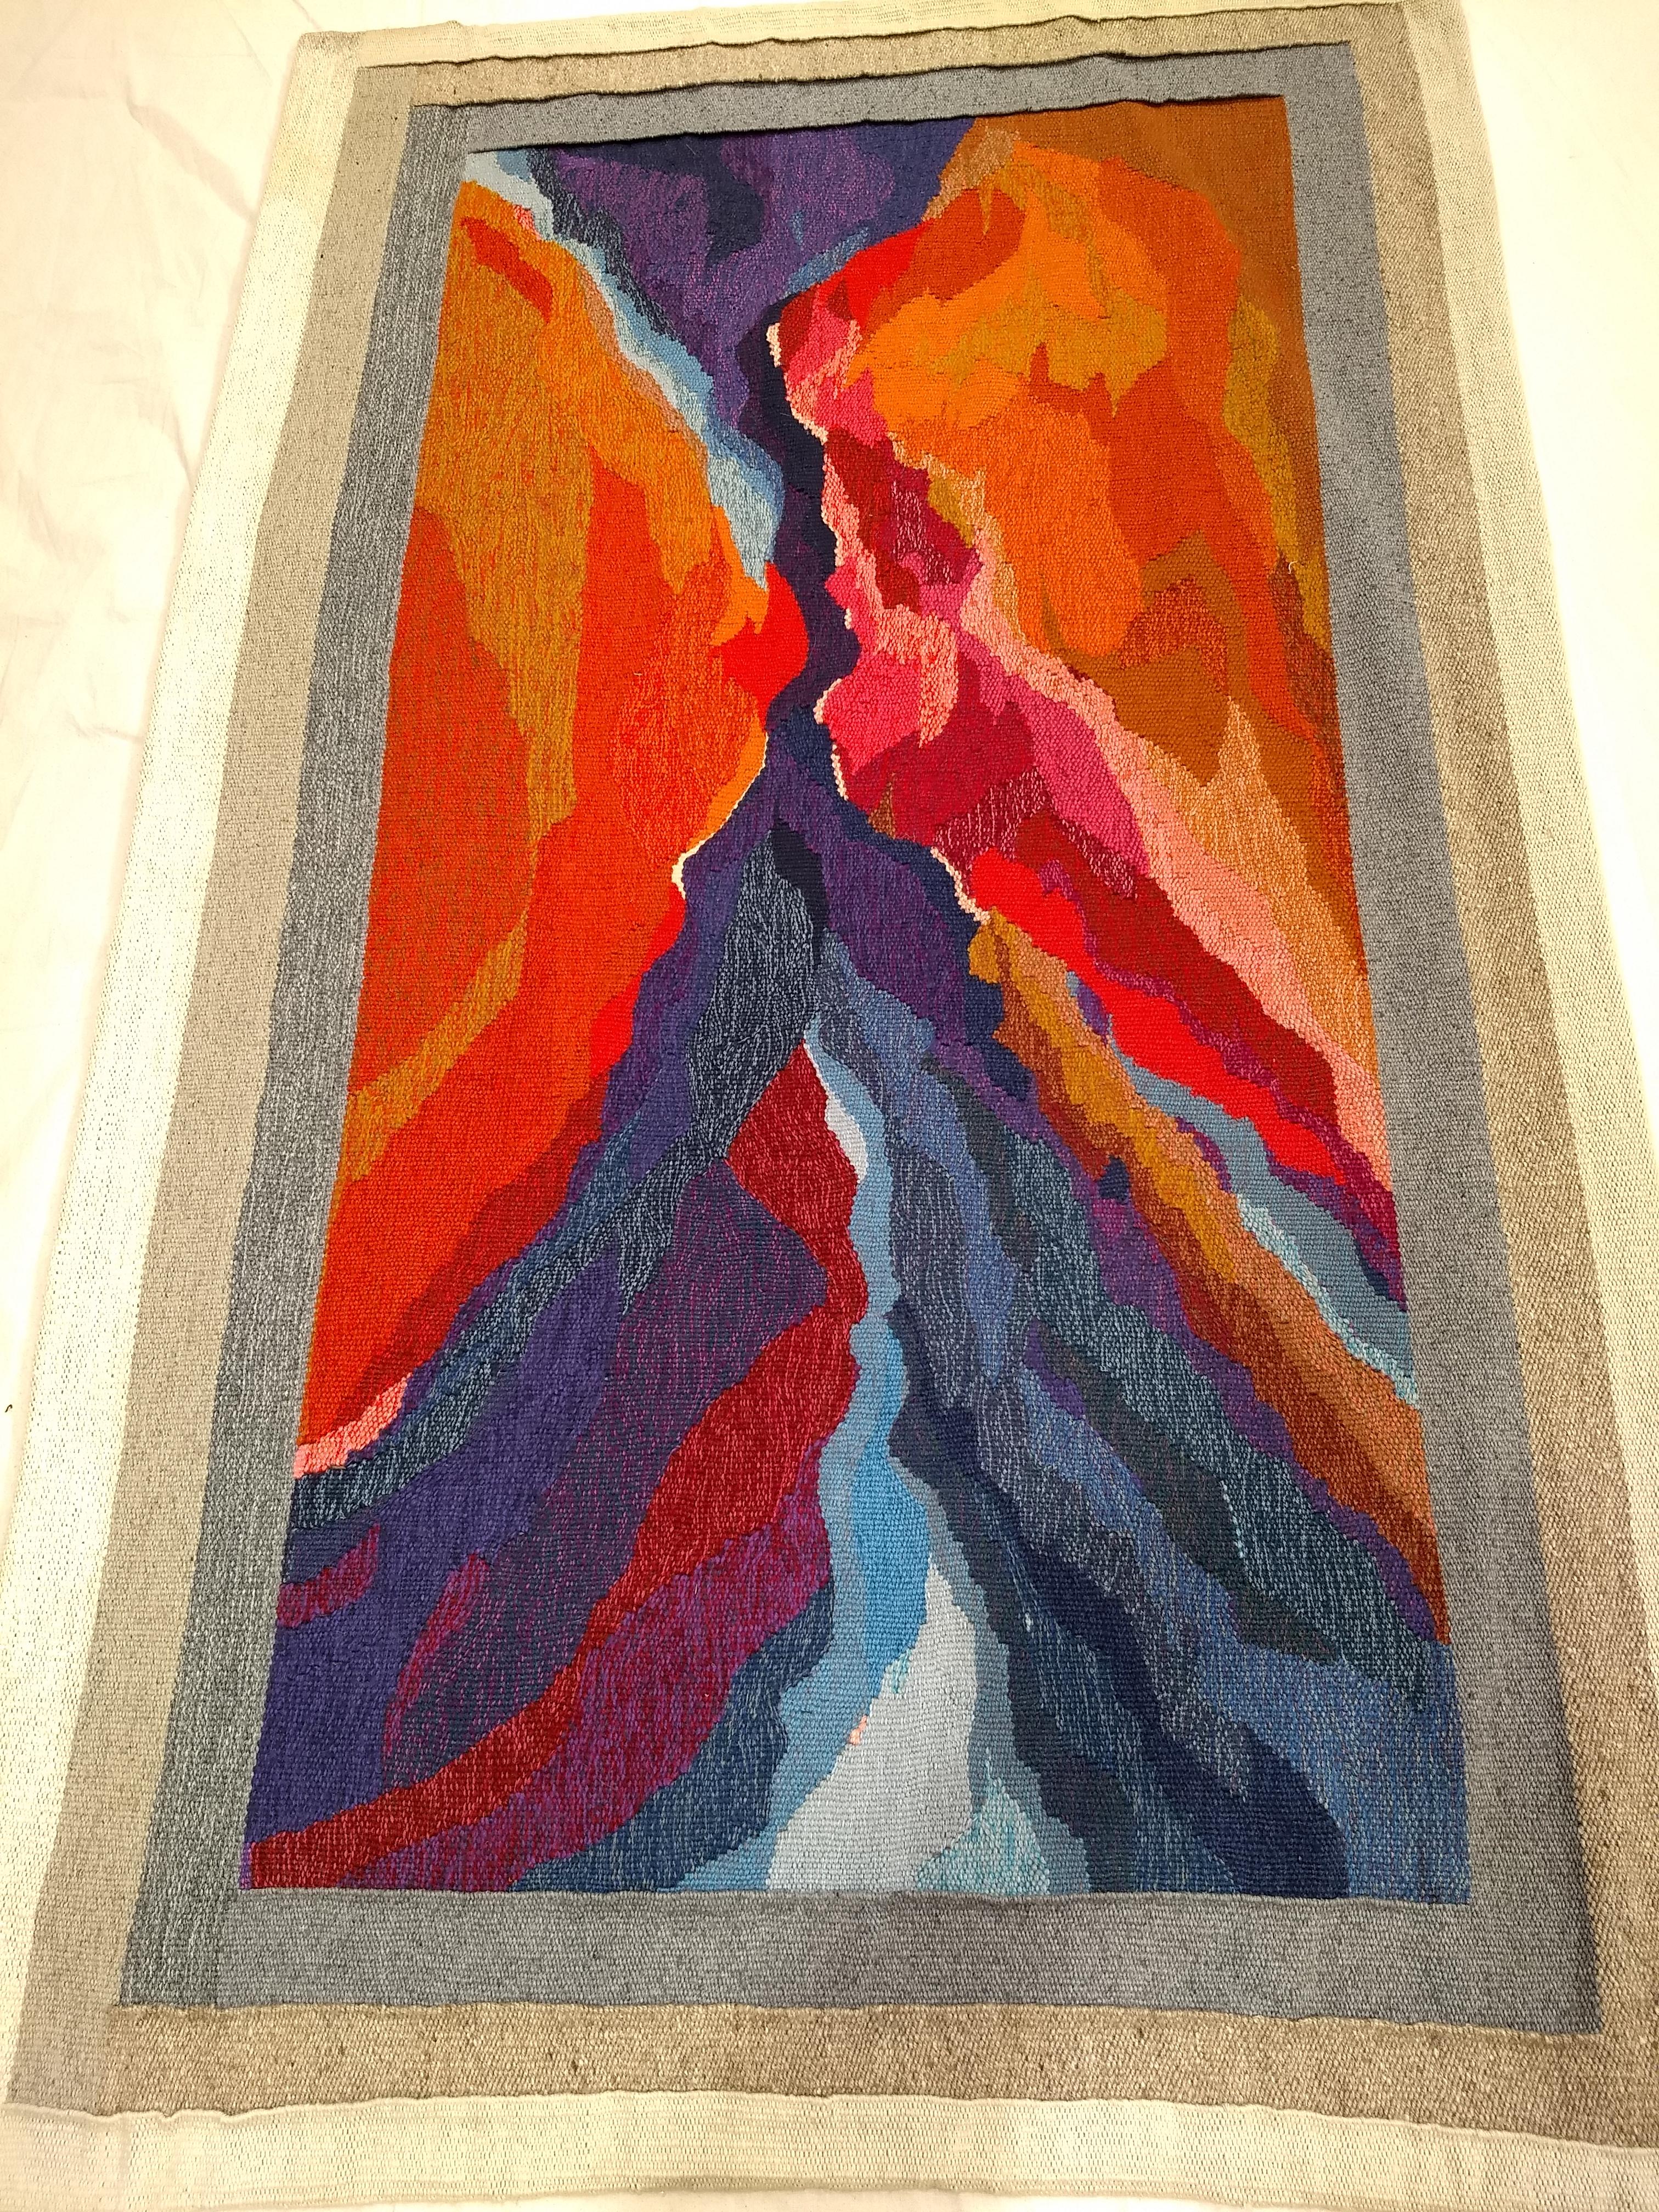 Vintage Tapestry Capturing the Sunset Colors in the American Southwest Landscape For Sale 3